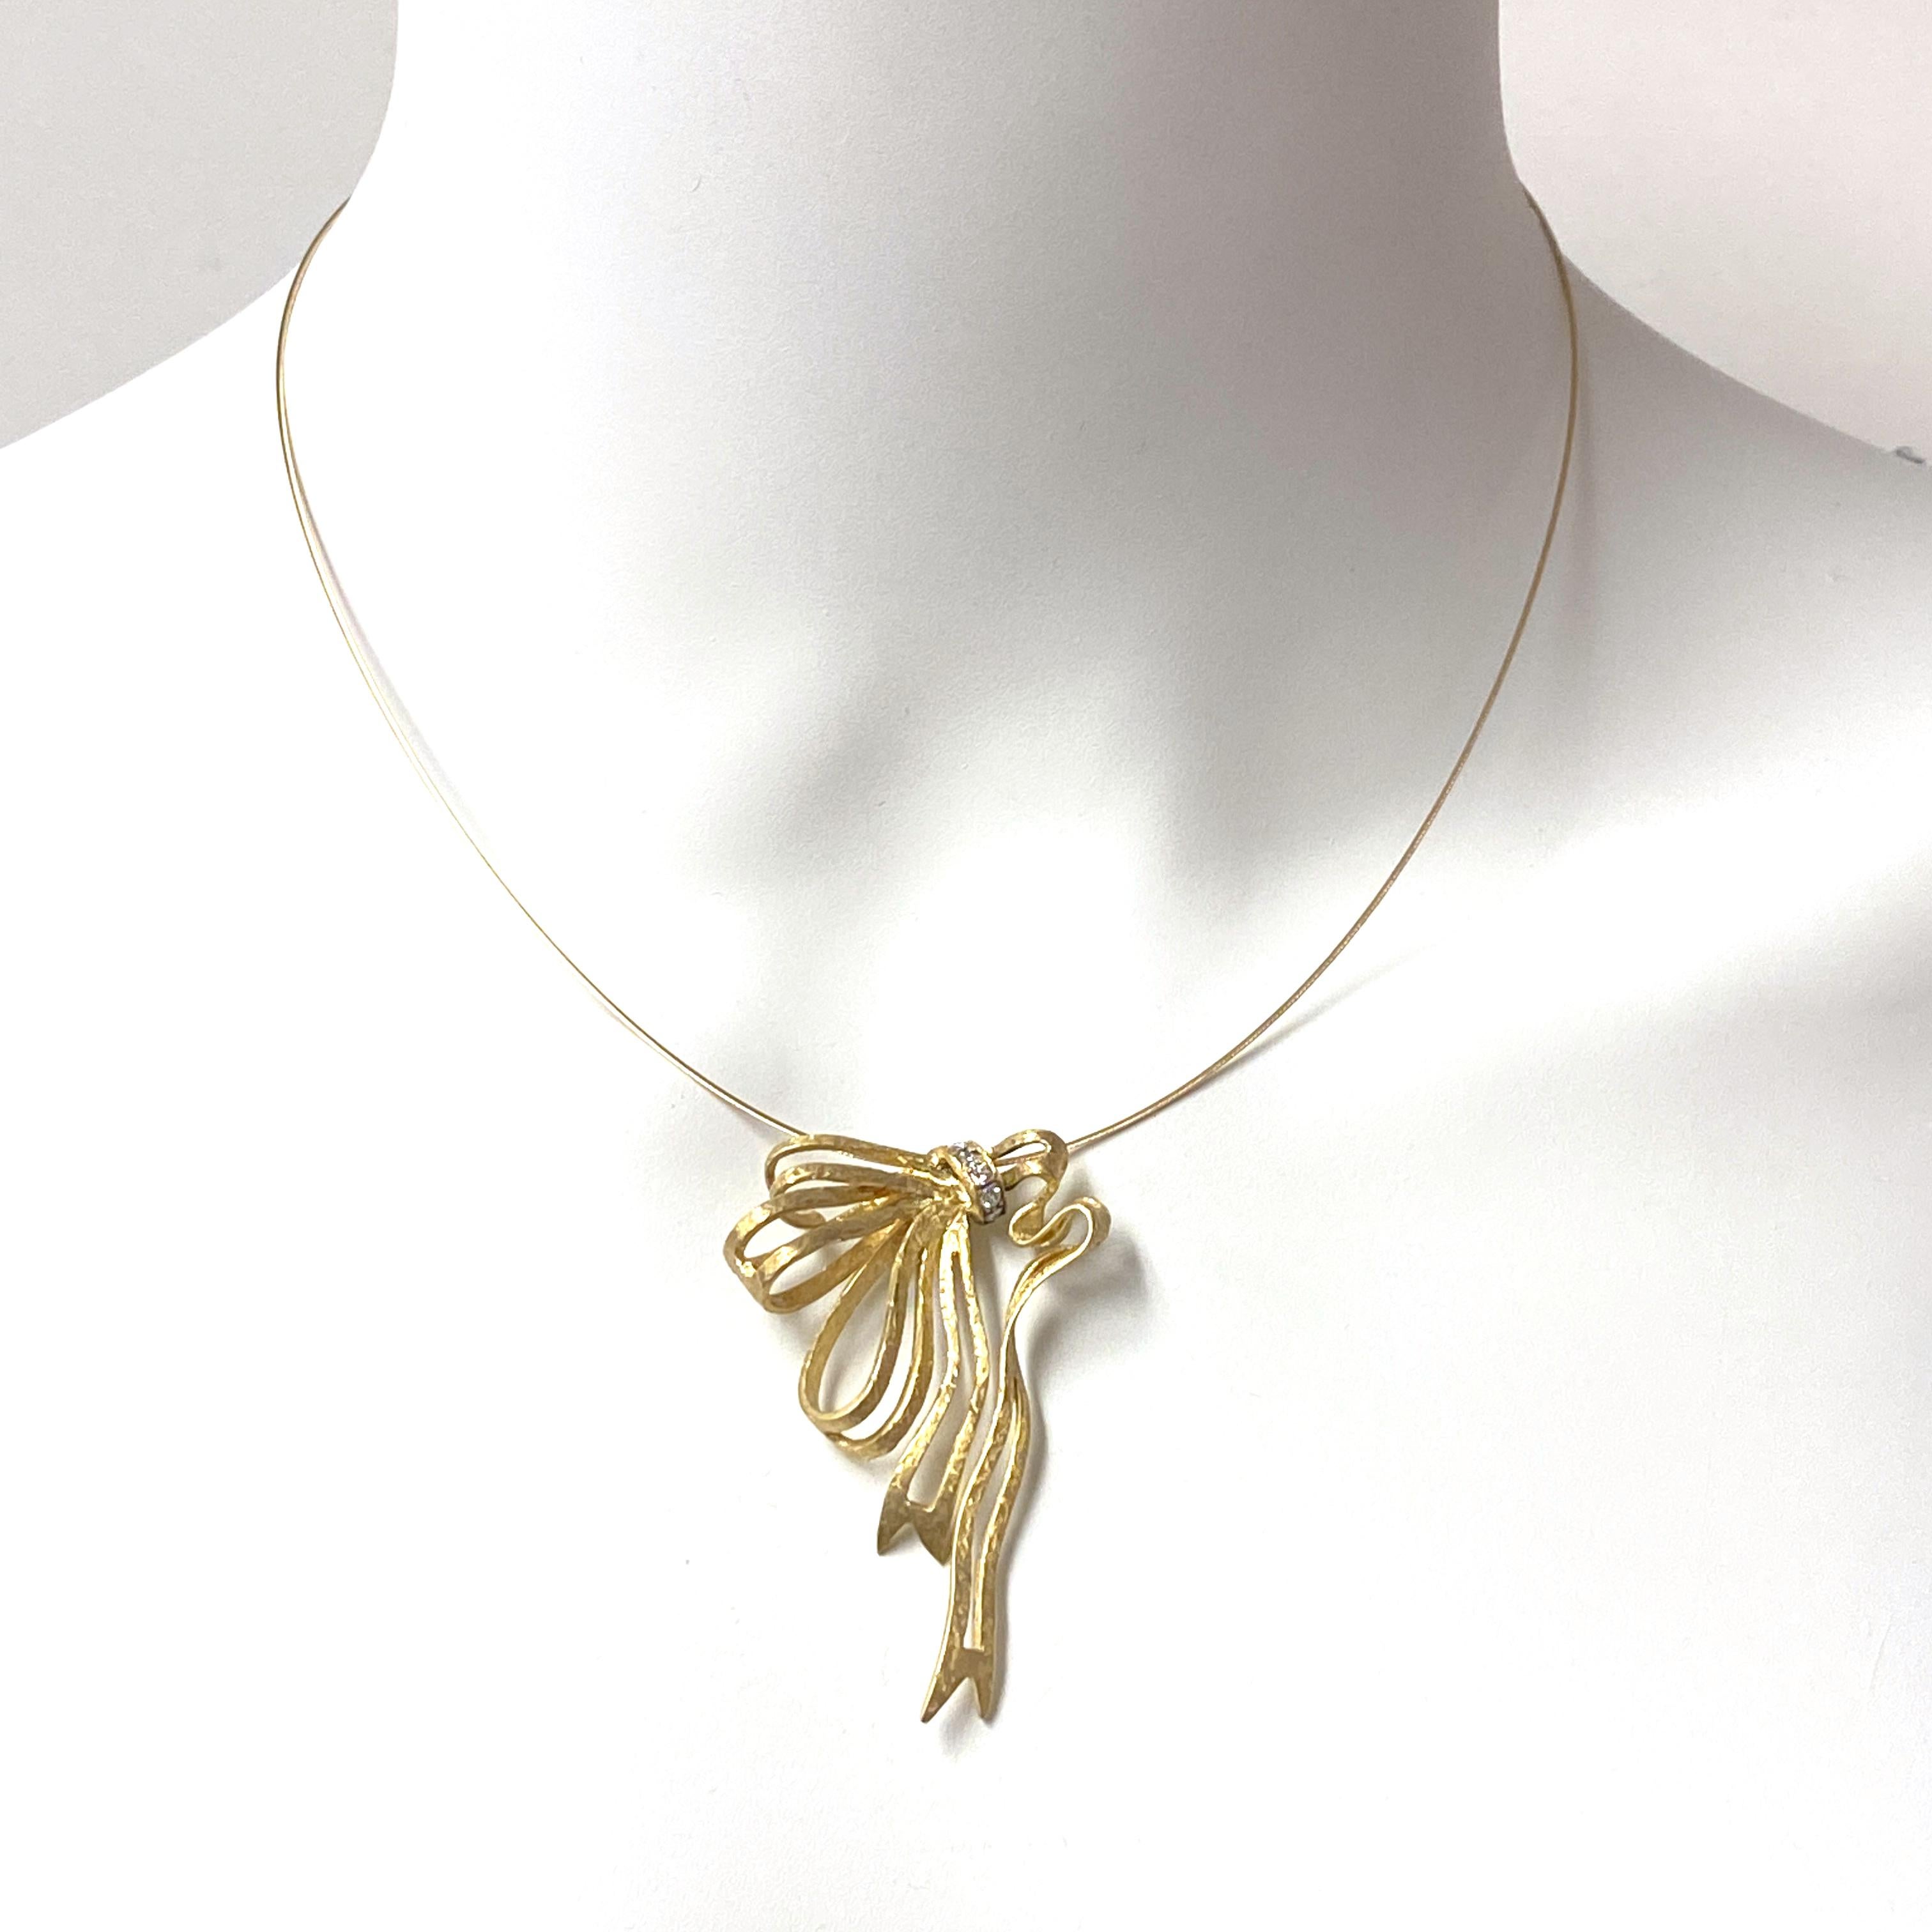 This lovely and unusual 18 karat gold pendant is cast in the shape of a gracefully unraveling ribbon.  The suggestion of diaphanous, flowy fabric is enhanced by the pendant's sanded and hammered finish.  As a final touch, the center is set with six